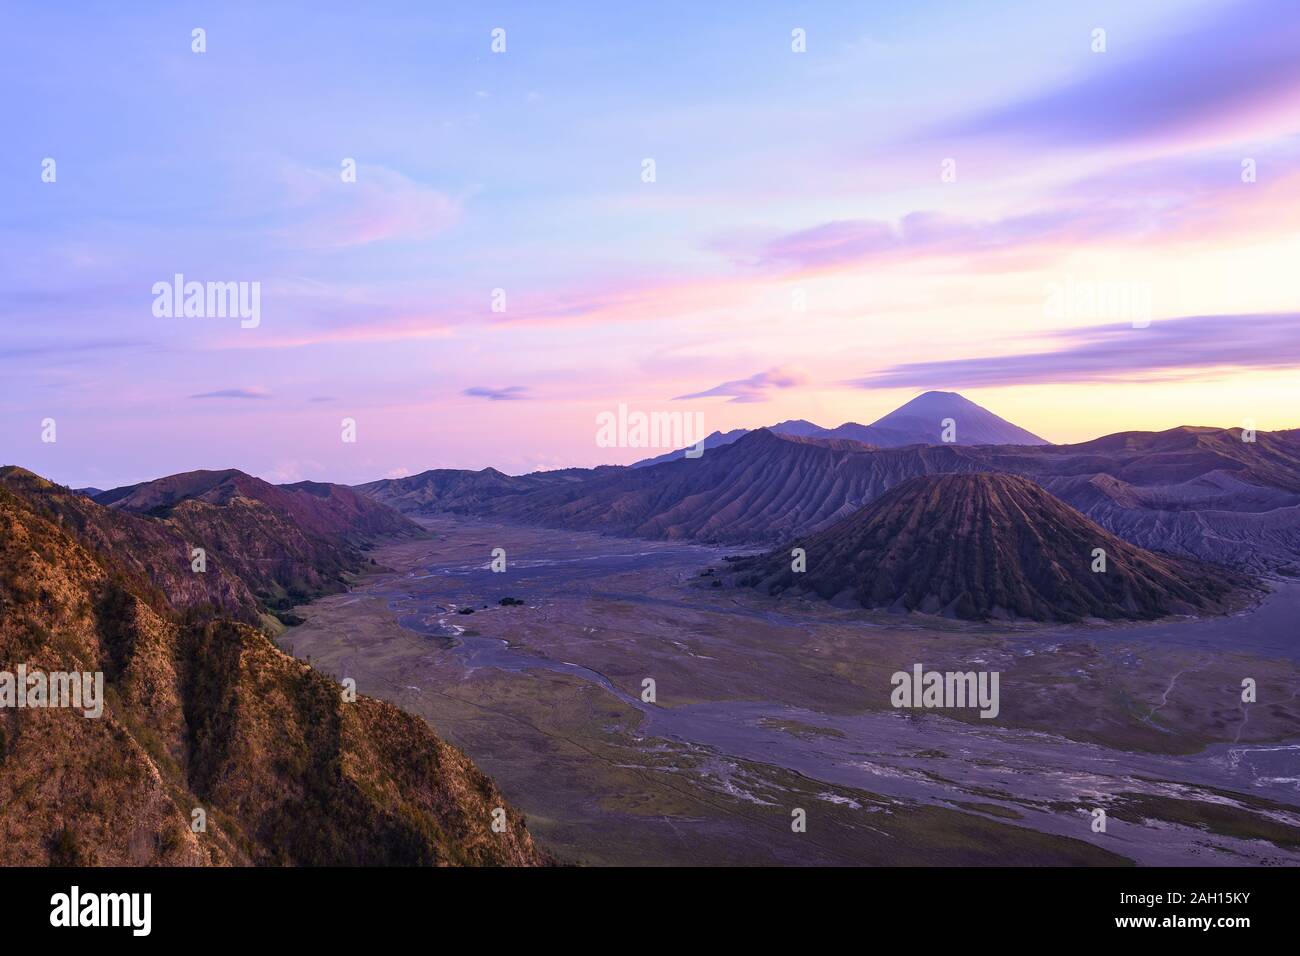 View from above, stunning aerial view of the Mount Batok, Mount Bromo and the Mount Semeru in the distance during a beautiful sunrise. Stock Photo